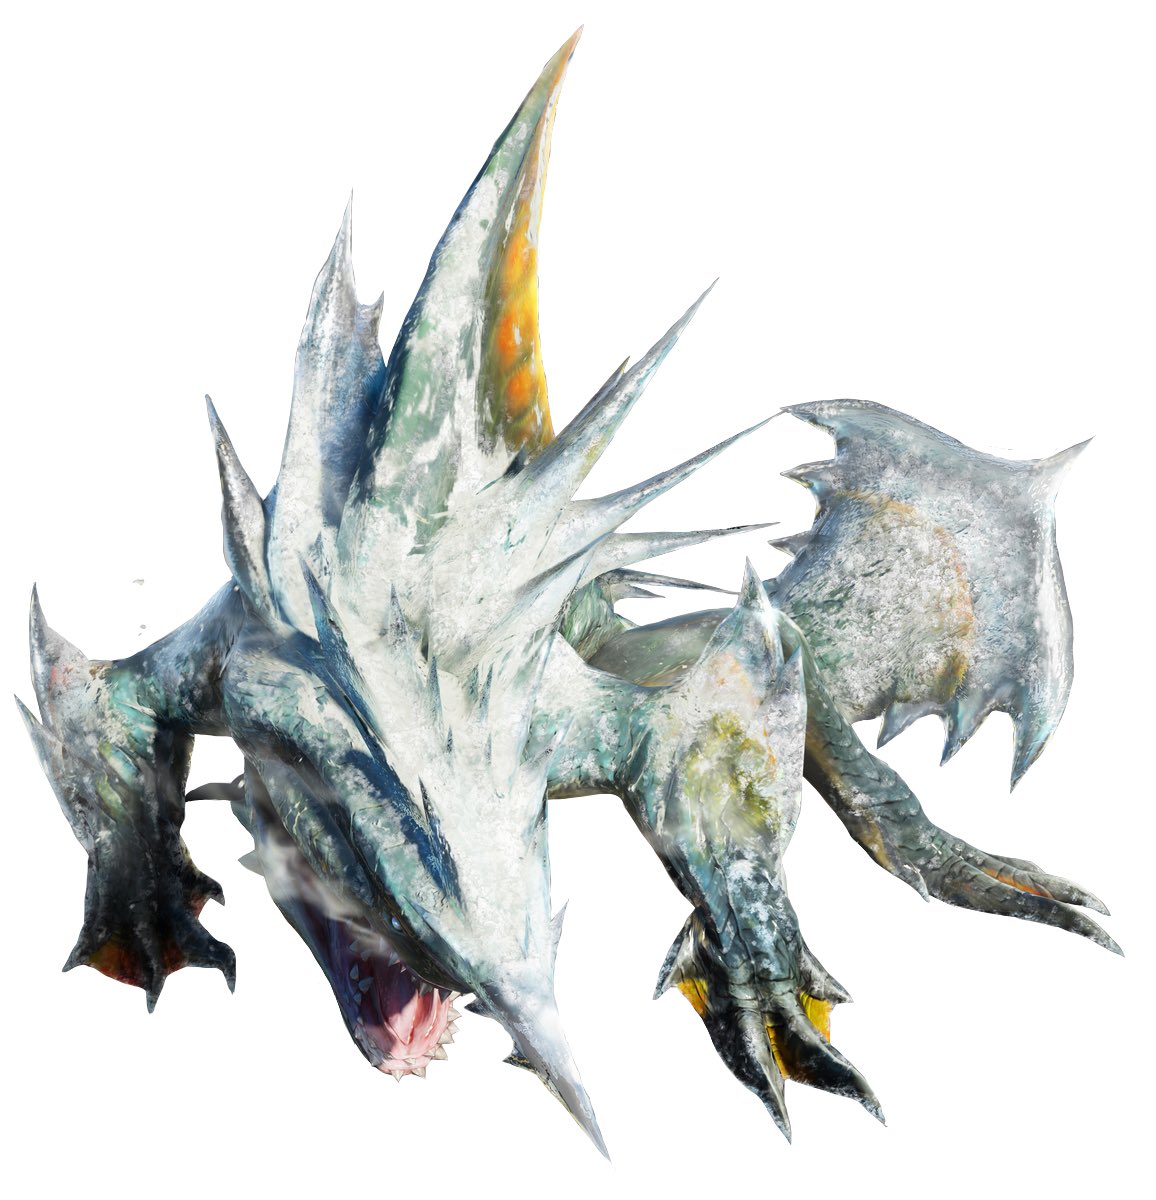 Wishes:-a lower tiered monster returning in Rise like Zamtrios-we saw a glimpse of Glavenus on the stickers for MHST2, so Astalos and Gammoth as well?-I don’t think we’re getting anything Frontier related, as much as I’d love to see one of the monsters return from there